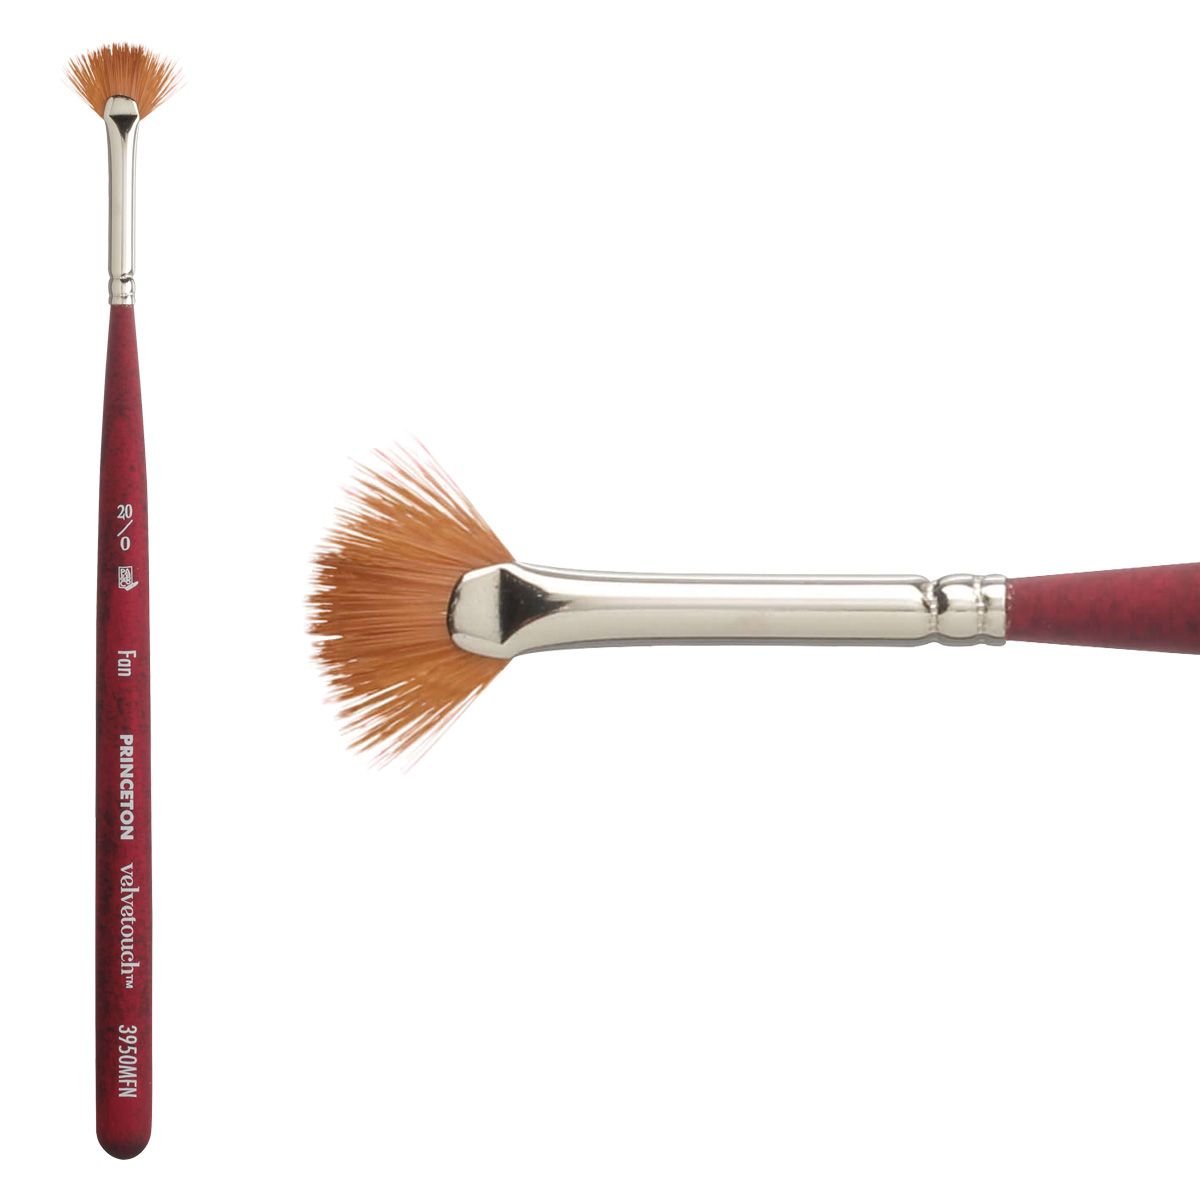 Princeton Velvetouch Series 3950 Synthetic Brushes - Set of 4